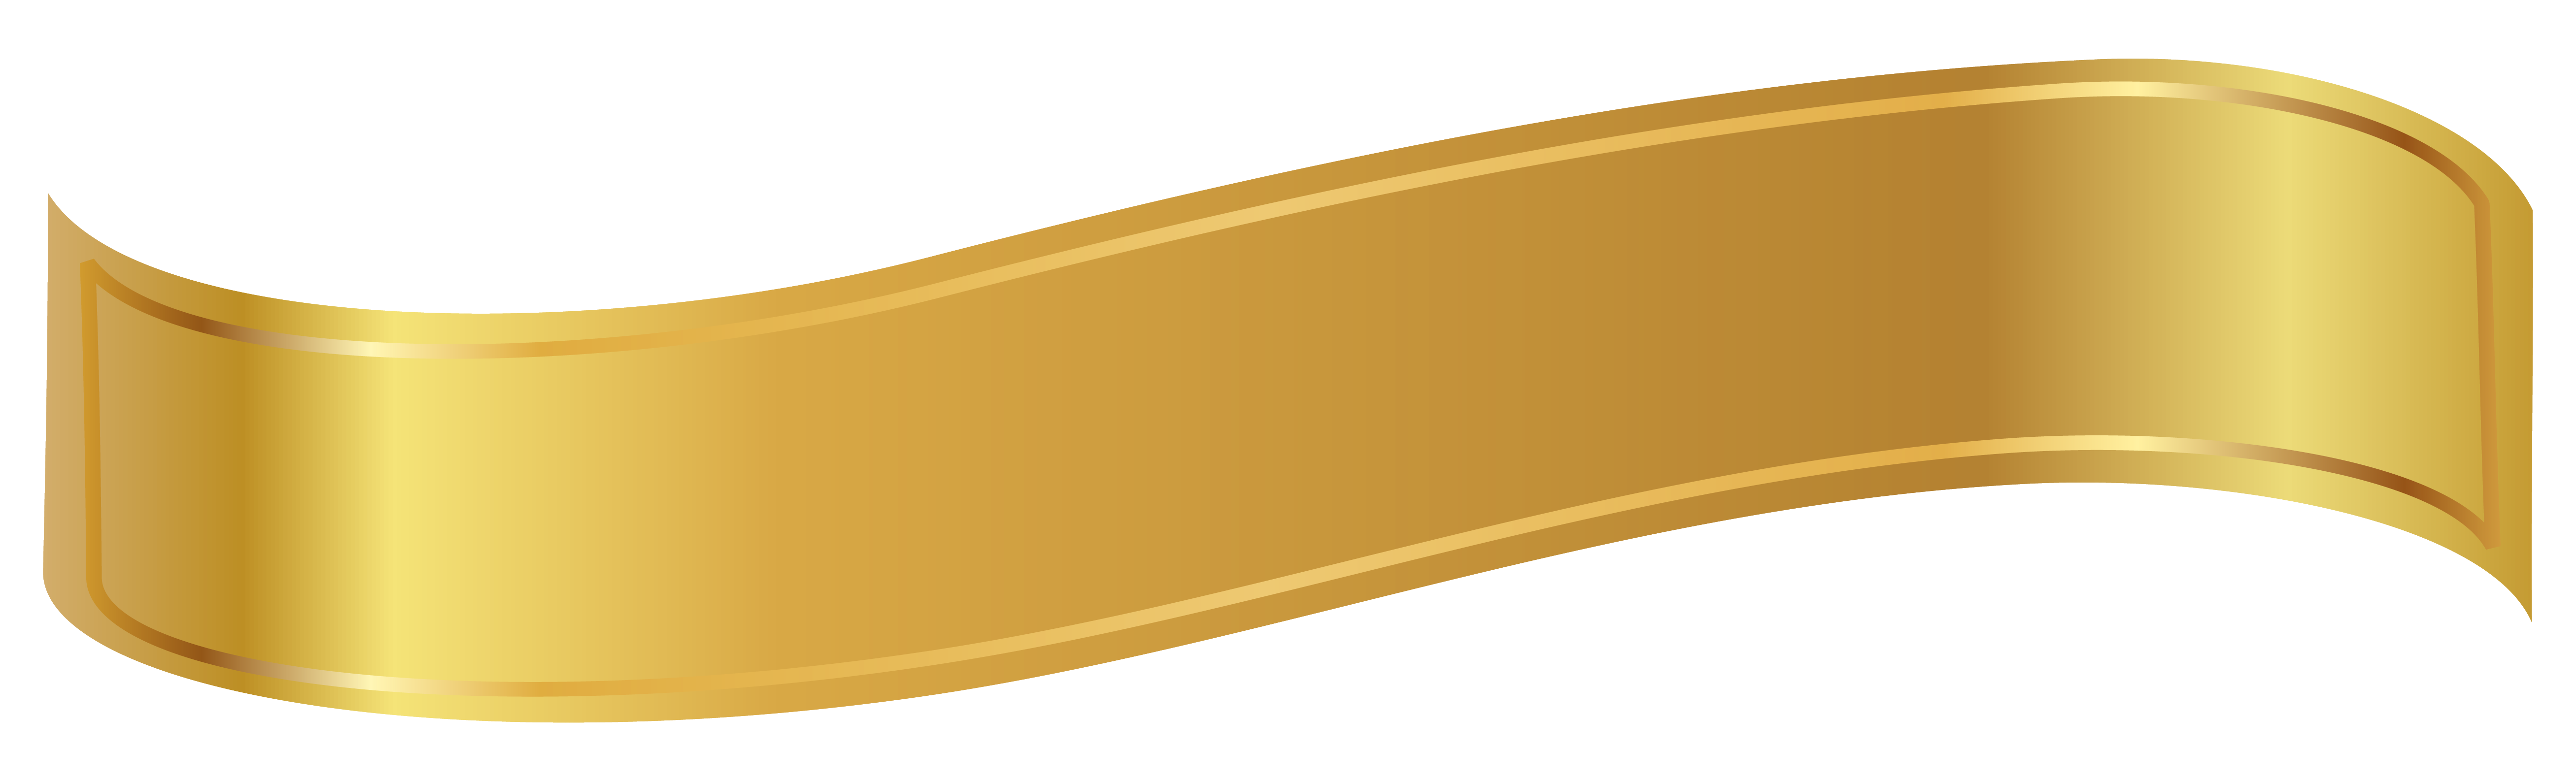 Free Gold Banner Ribbon Png Download Free Gold Banner Ribbon Png Png Images Free Cliparts On